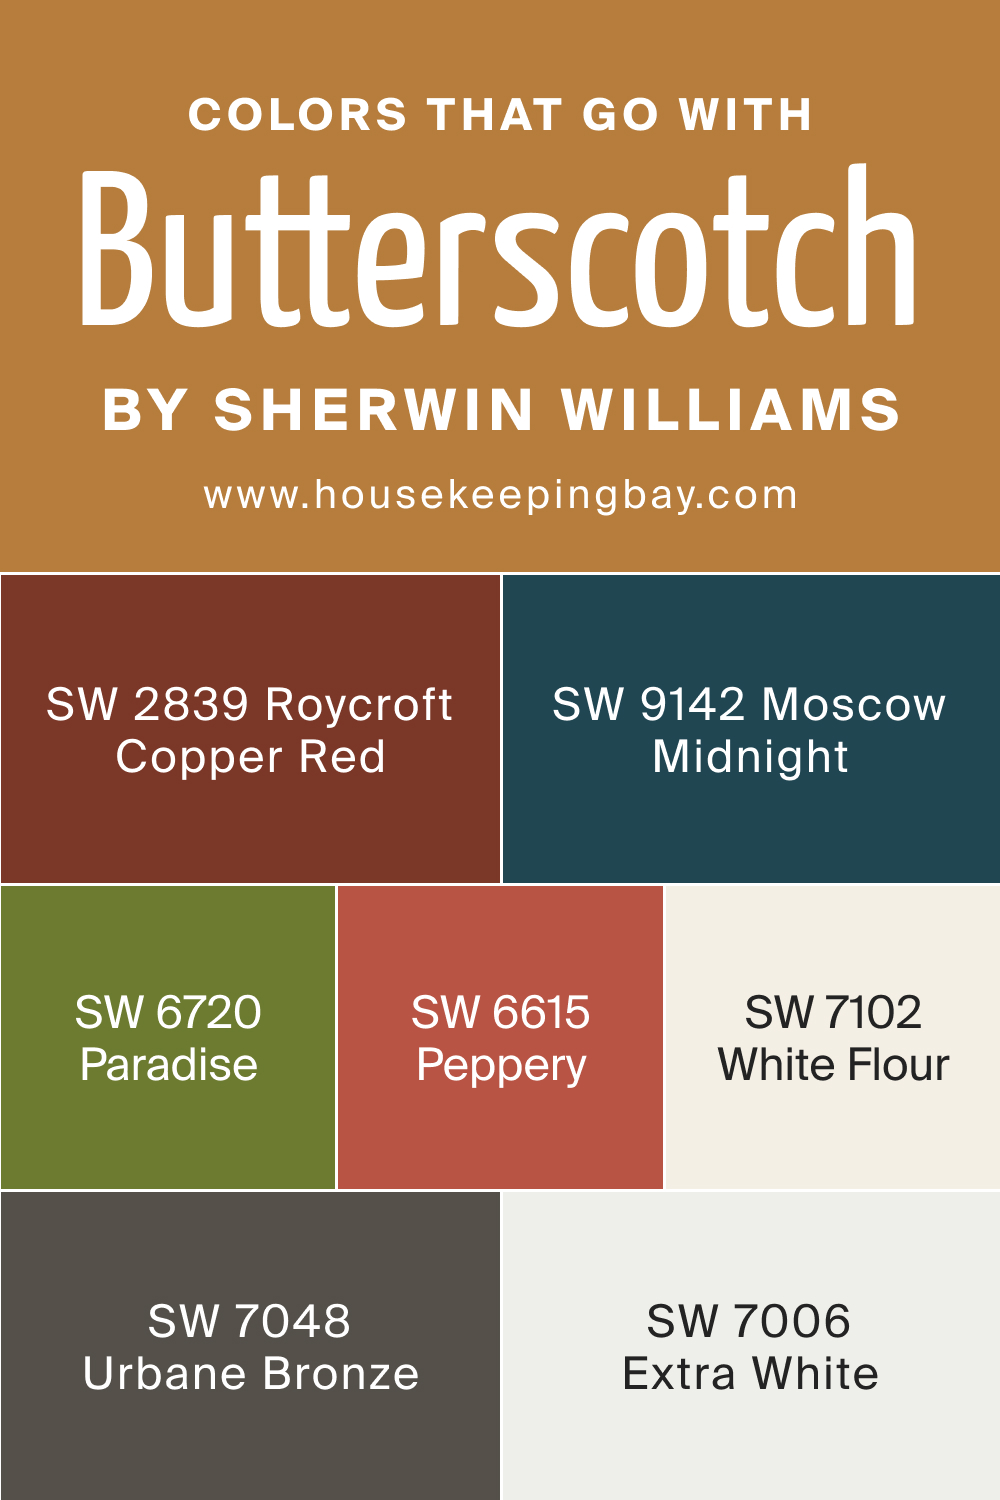 Colors that go with SW 6377 Butterscotch by Sherwin Williams